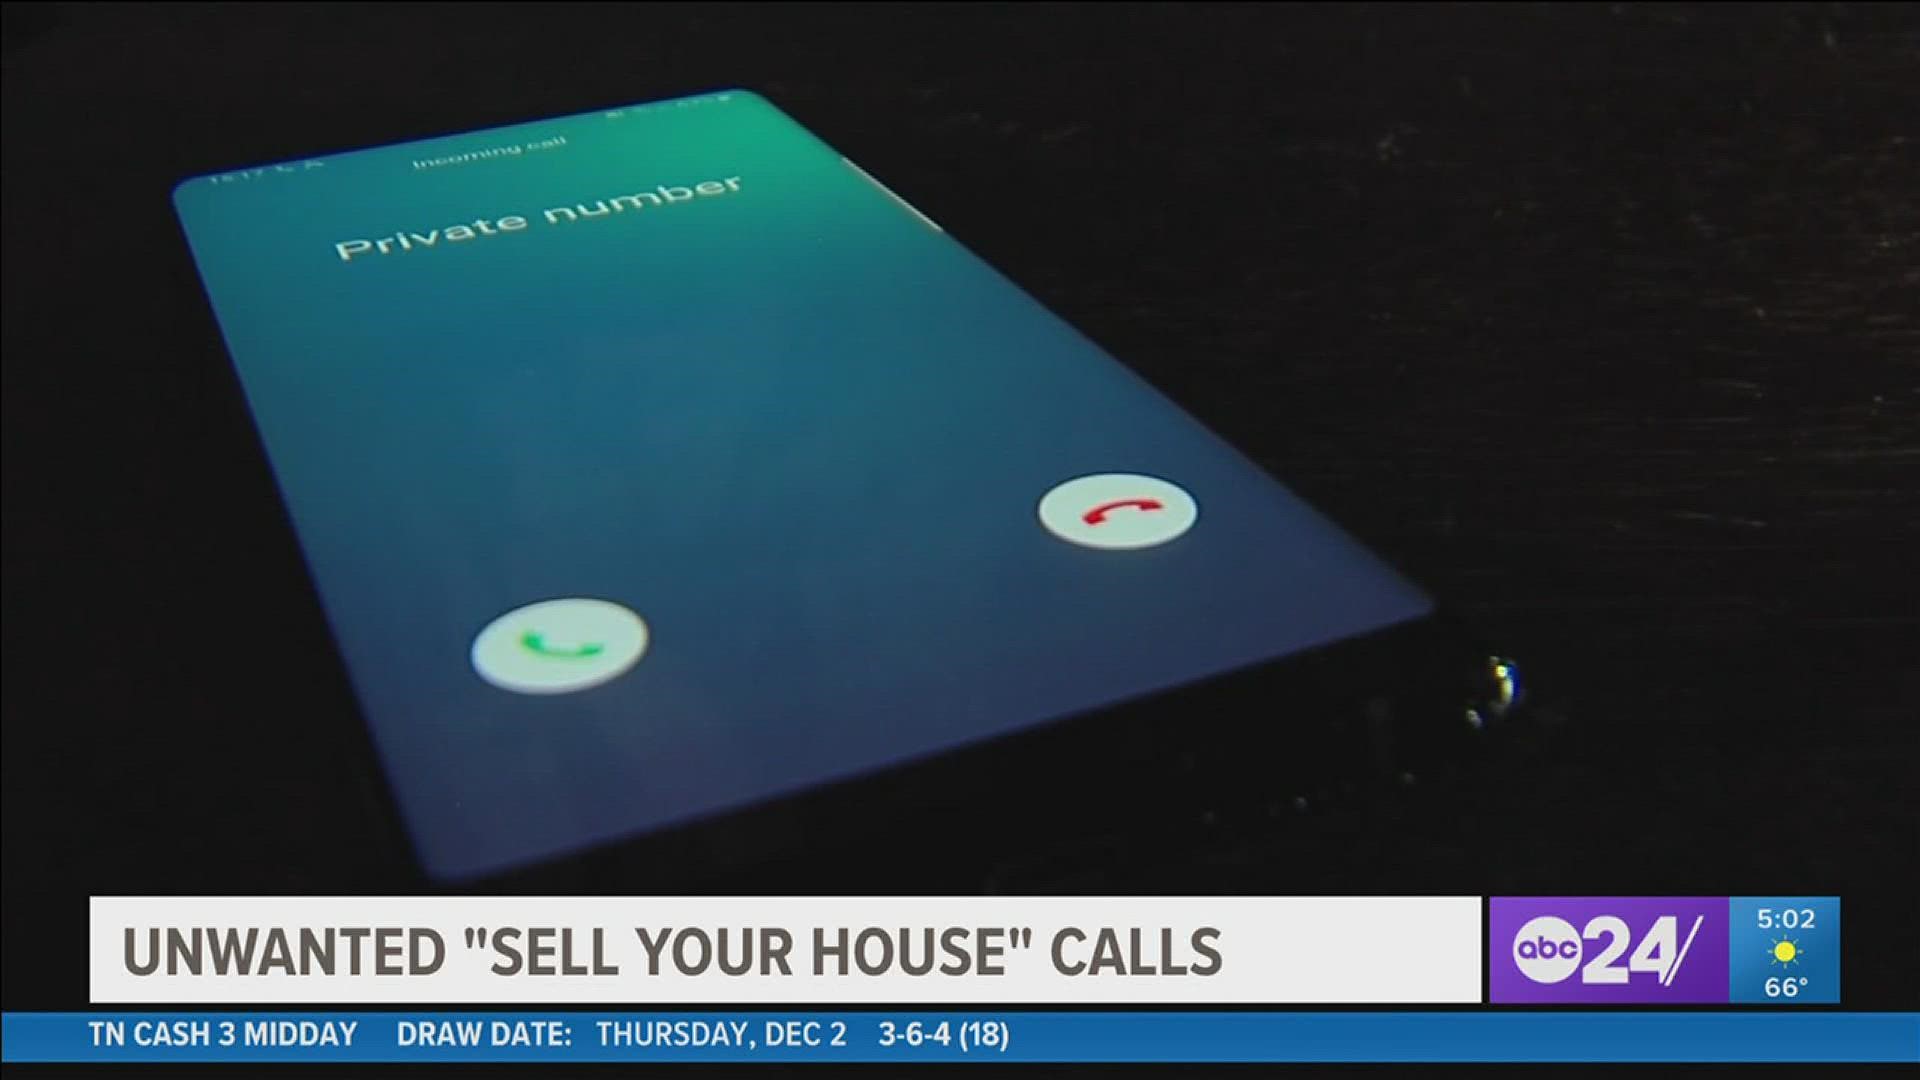 Memphis's hot housing market has homeowners being bombarded with unwanted calls. But can anything be done to stop them?